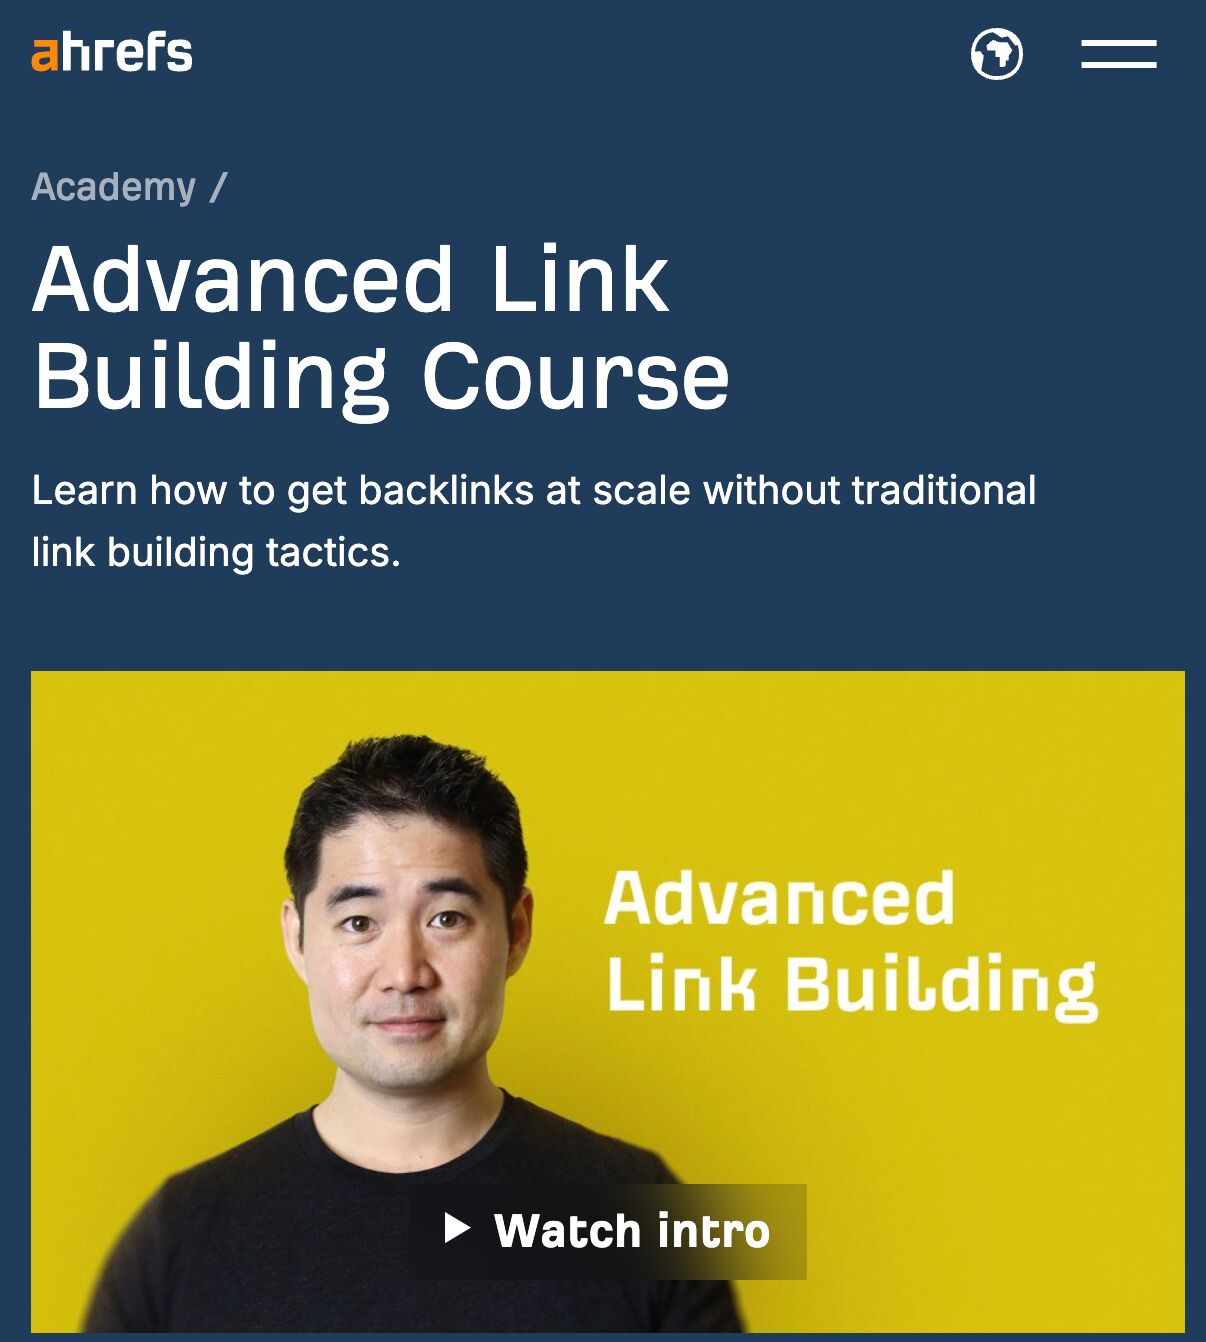 Advanced Link Building Course by Ahrefs